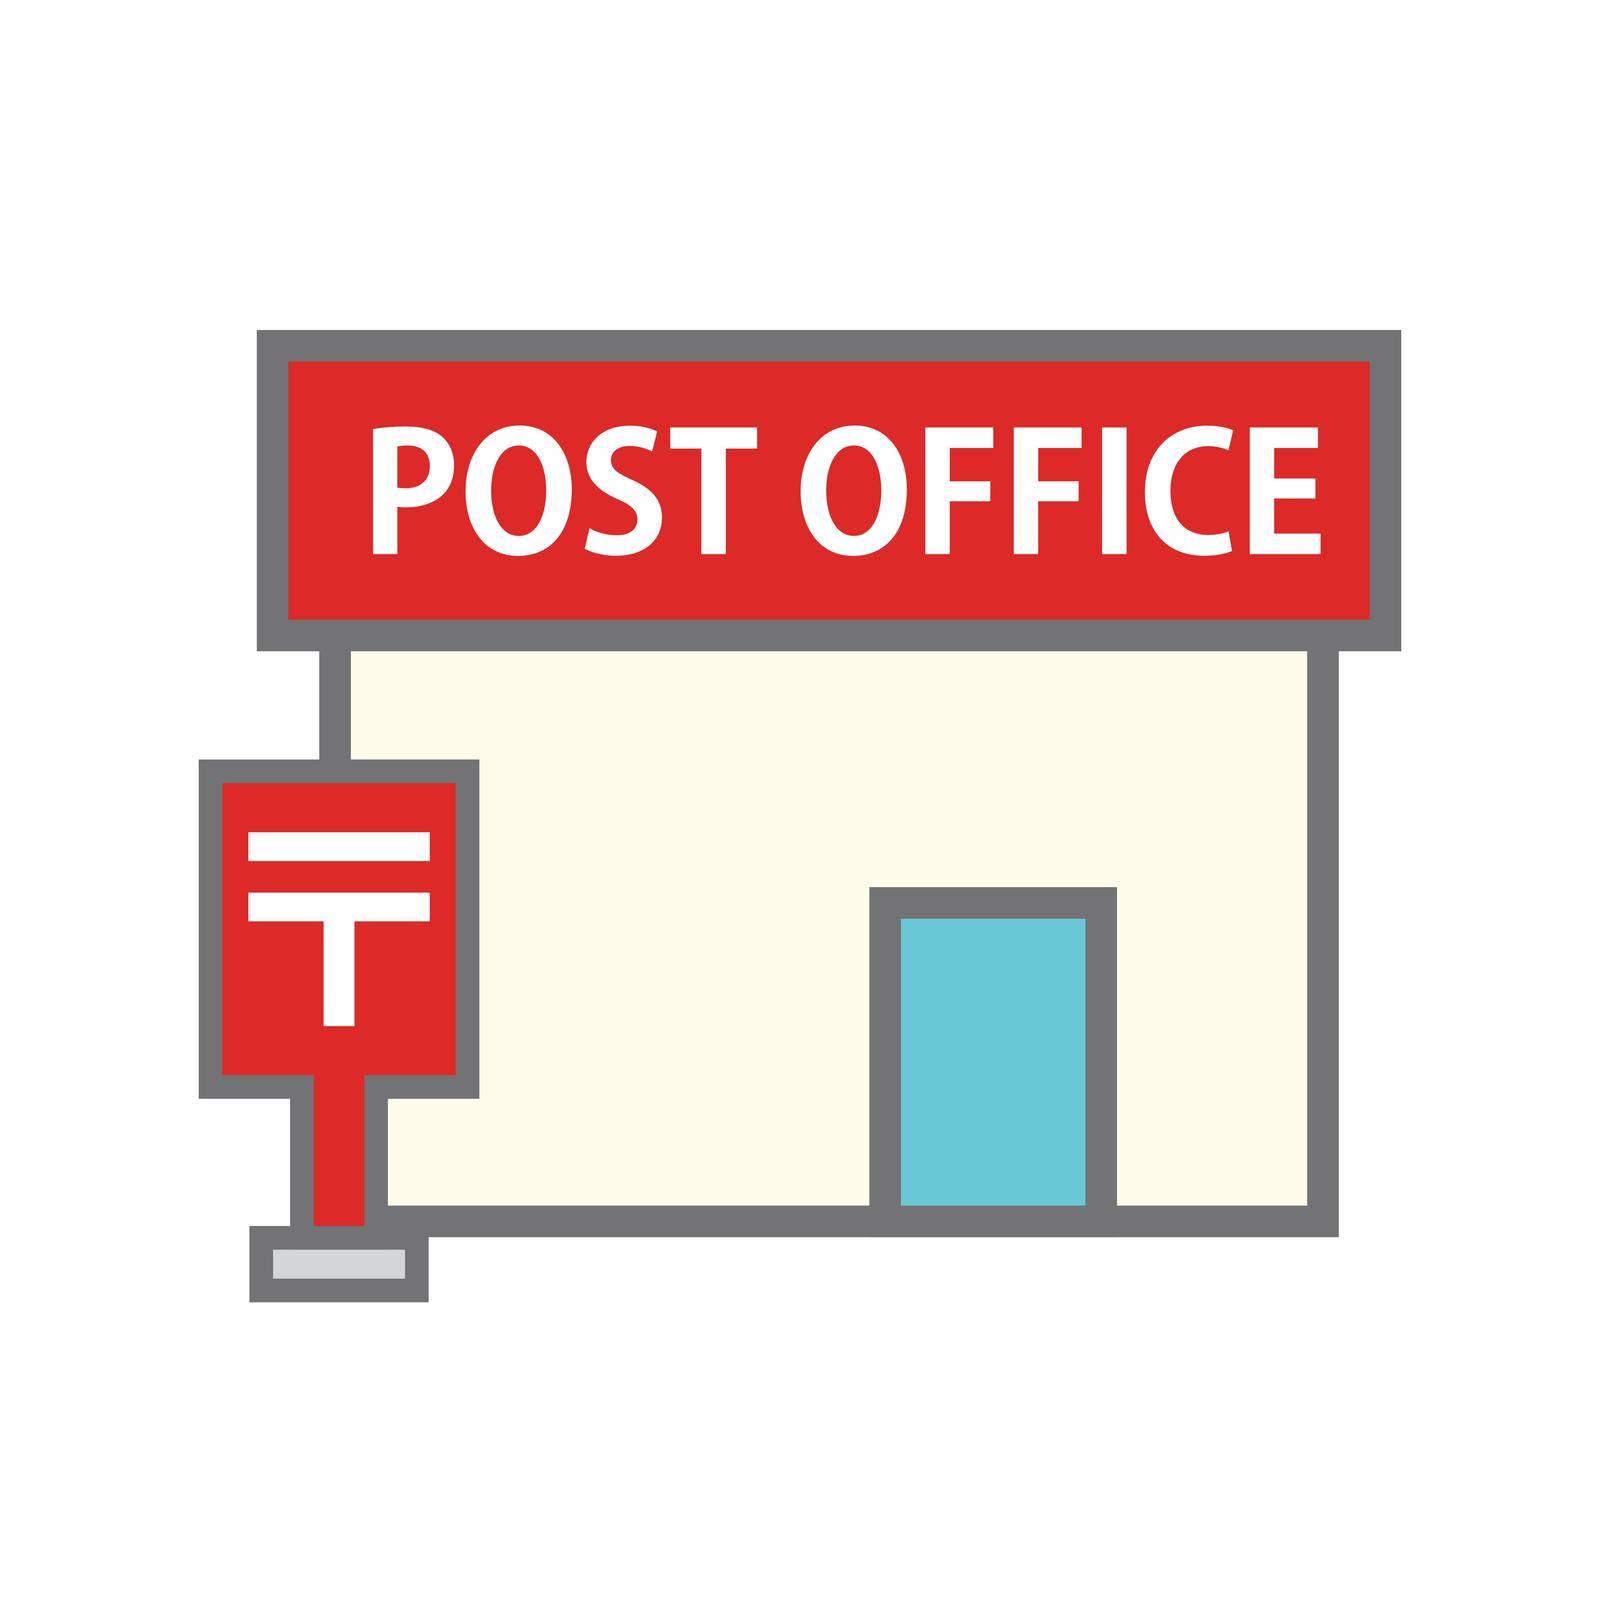 Post Office and Post Box. Editable vector.